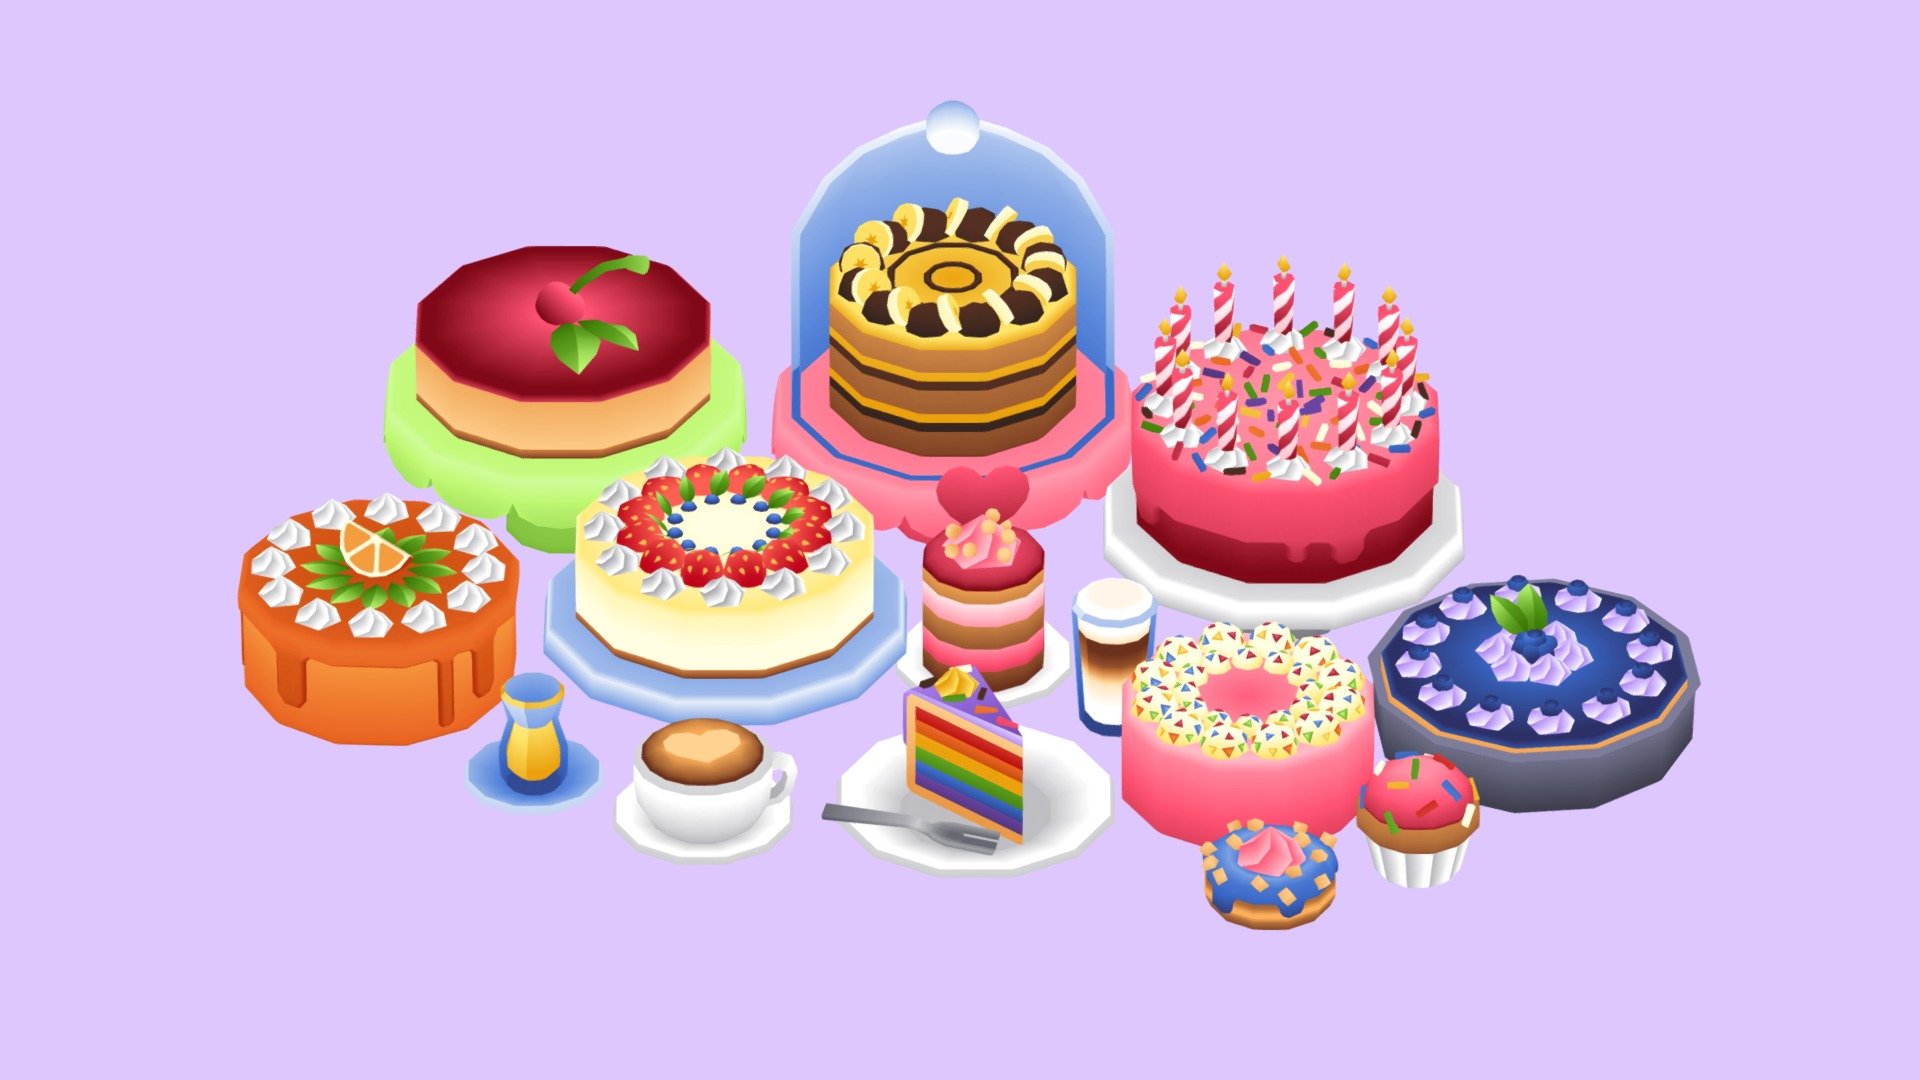 A big collection of colorful cakes, pies, teas and coffee props. Perfect for a café setting! This package contains 220+ Assets

Tris: 420tris average Texture: 512x512px

These are part of &gt;Jacky’s Lowpoly Cake Pack&lt; on the Unity Assetstore 3d model